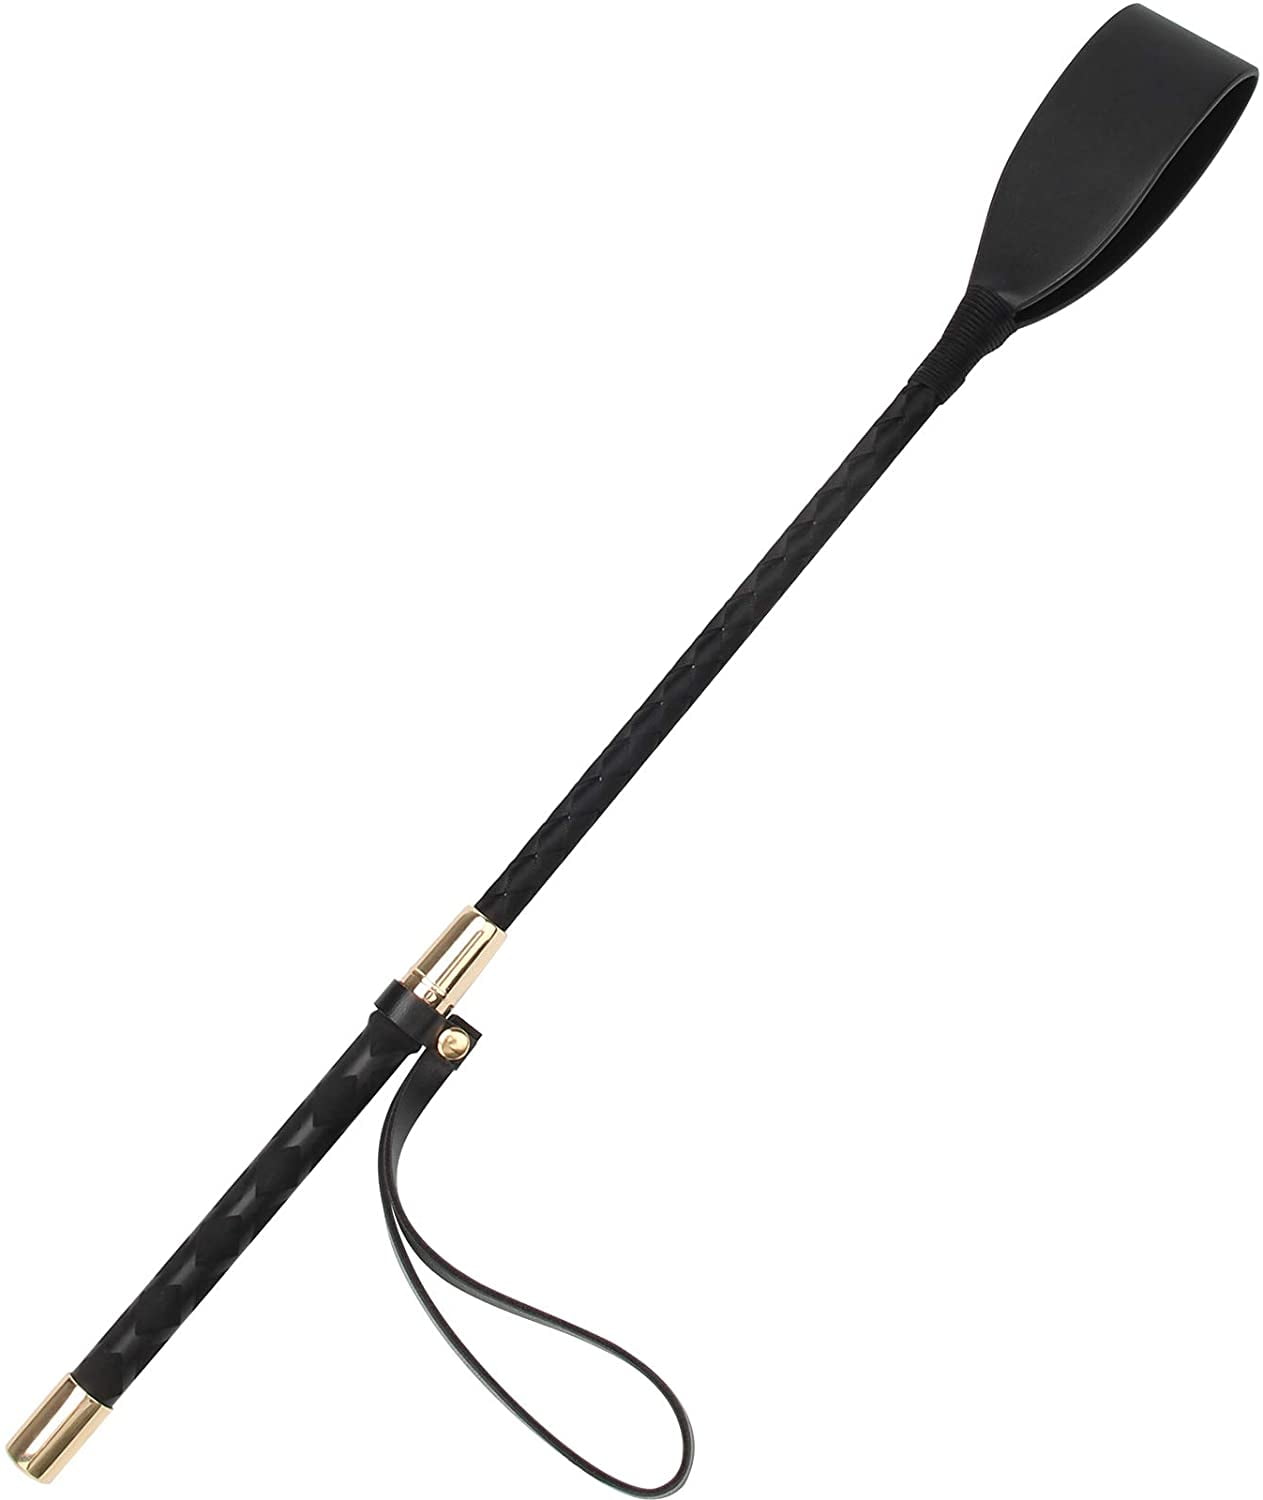 PU Leather Riding Crop Paddle Horse Whip Flogger Adult Toy 